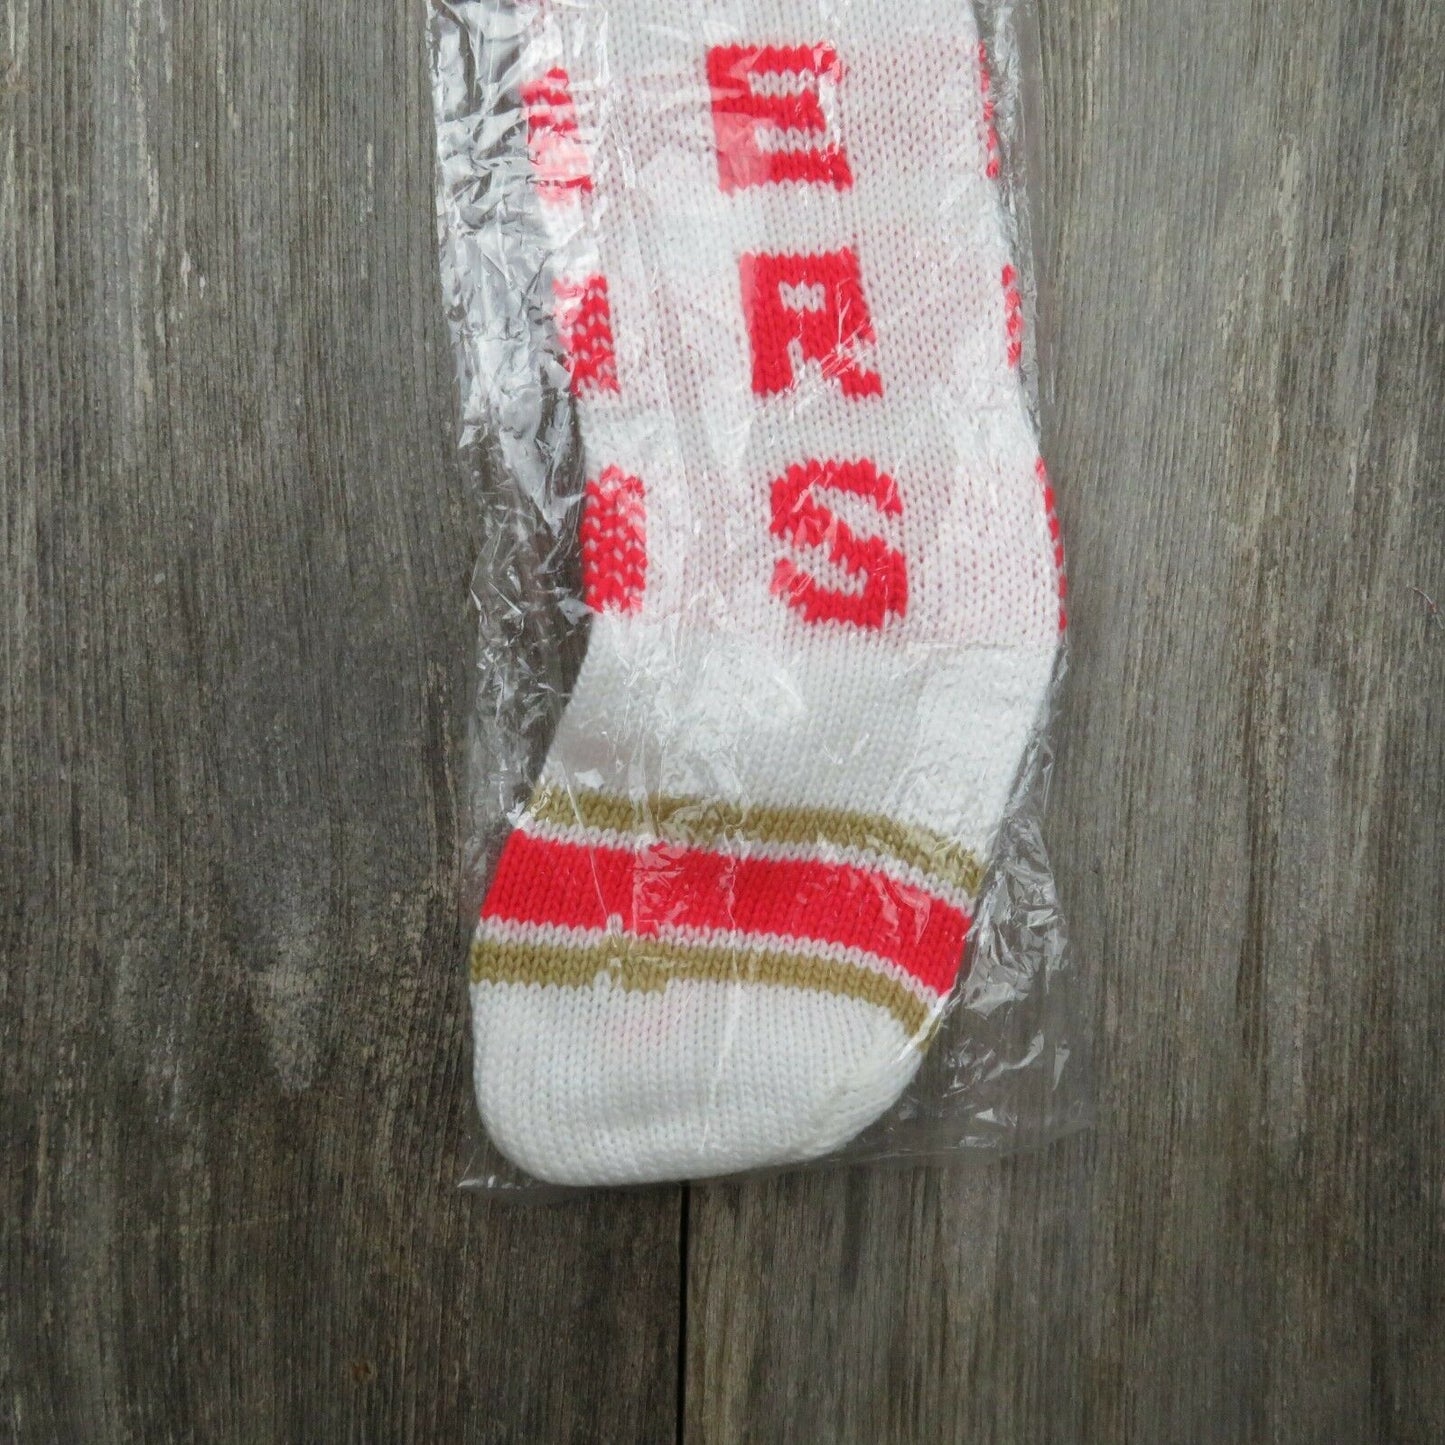 Vintage 49ers Christmas Stocking San Francisco NFL Knitted Knit Football st29 - At Grandma's Table